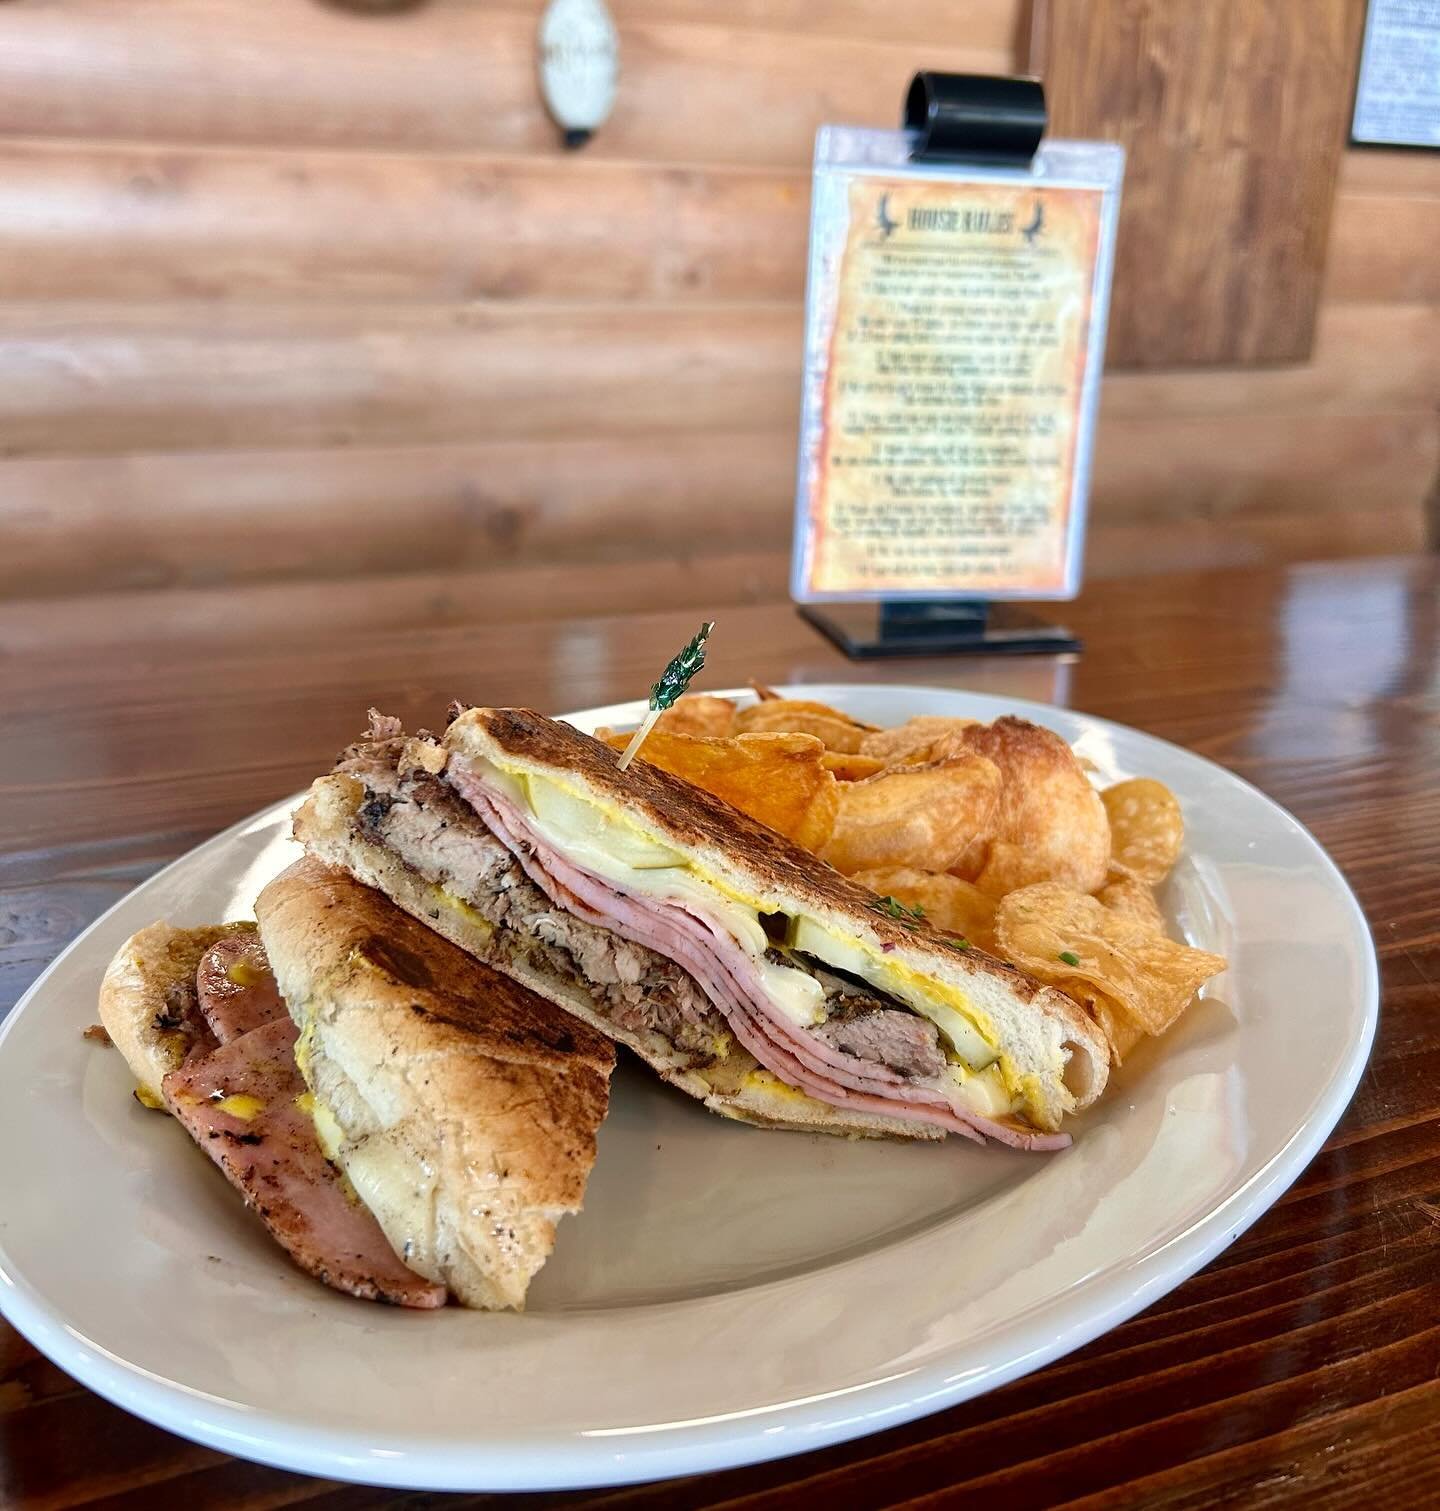 Littleton/Santa Fe Kitchen Special - Cubano Sandwich! Slow roasted pork, carved ham, melted swiss cheese, pickled, &amp; mustard on ciabatta. Pressed to toasted perfection! 
Only available at our Littleton location at 5350 S Santa Fe Dr, Unit F Littl